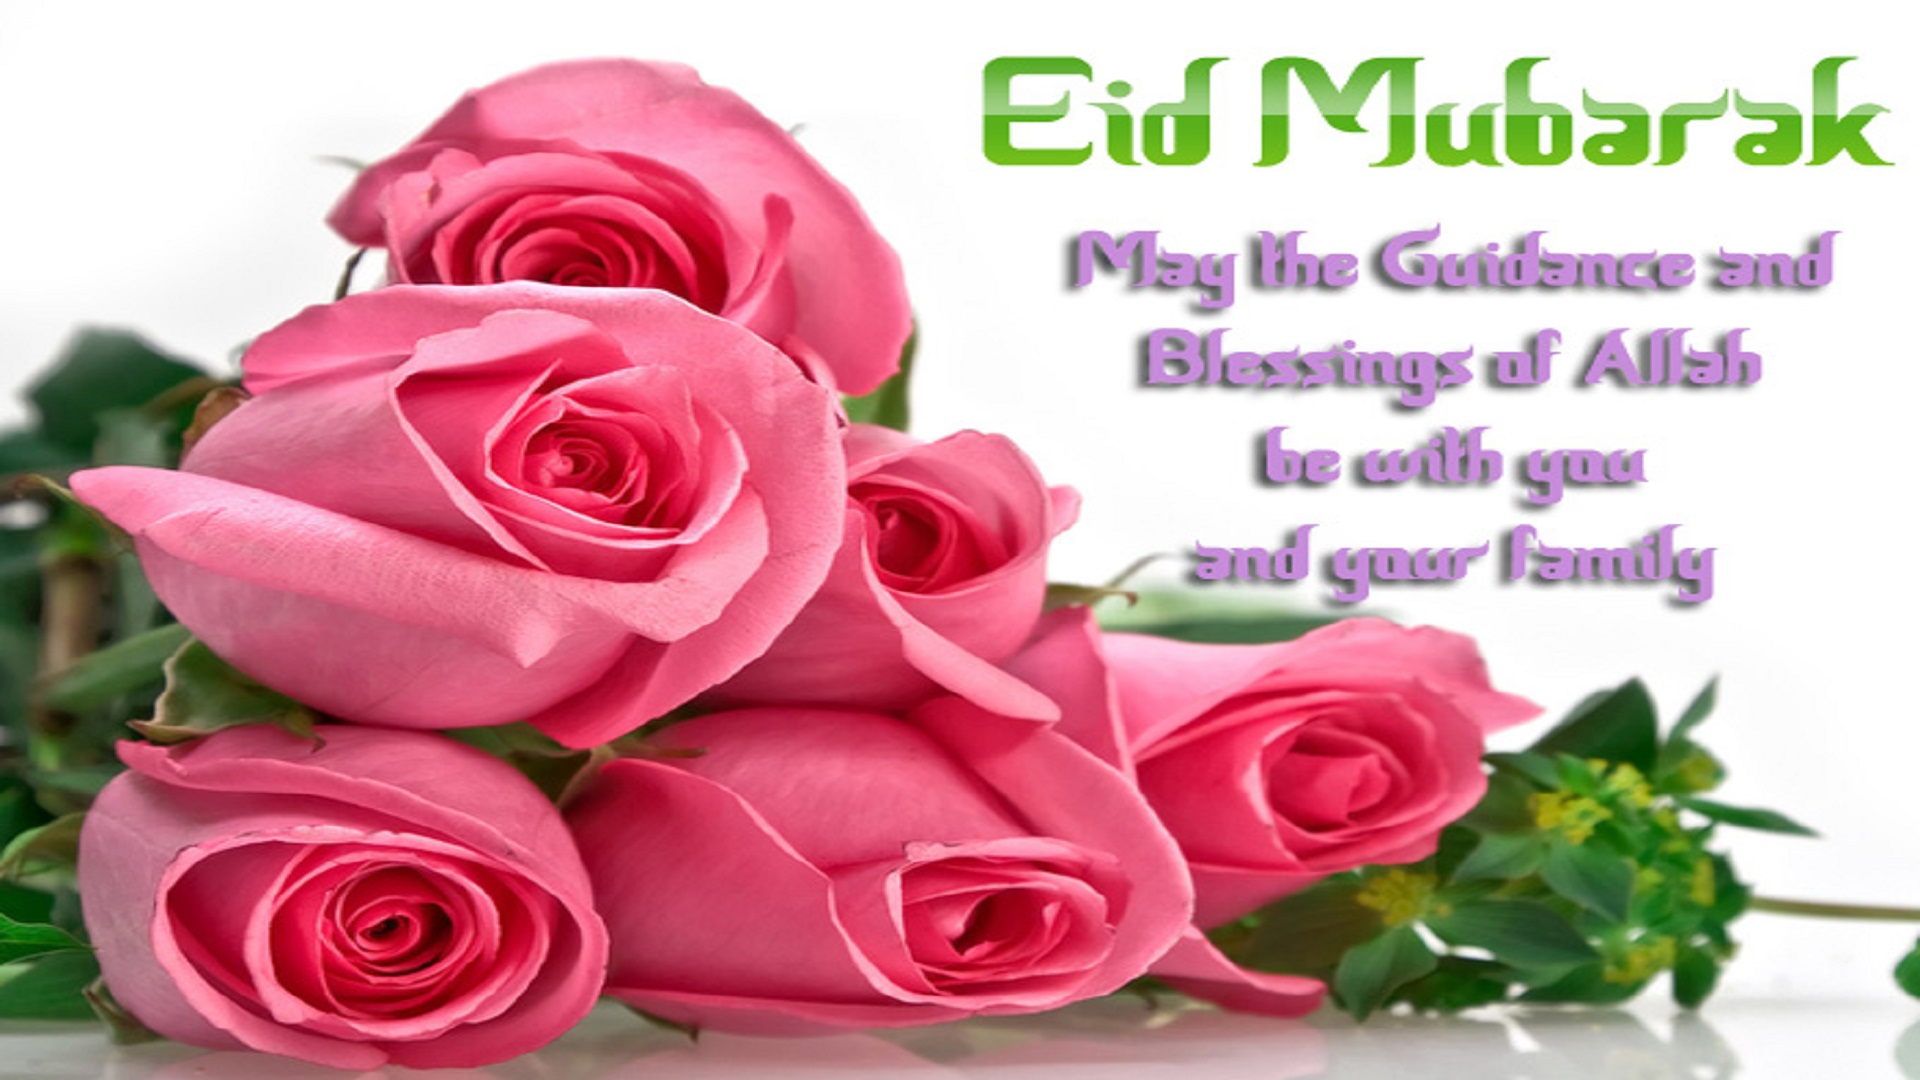 Download Eid Mubarak Wishes Family Mobile Free Hd Images